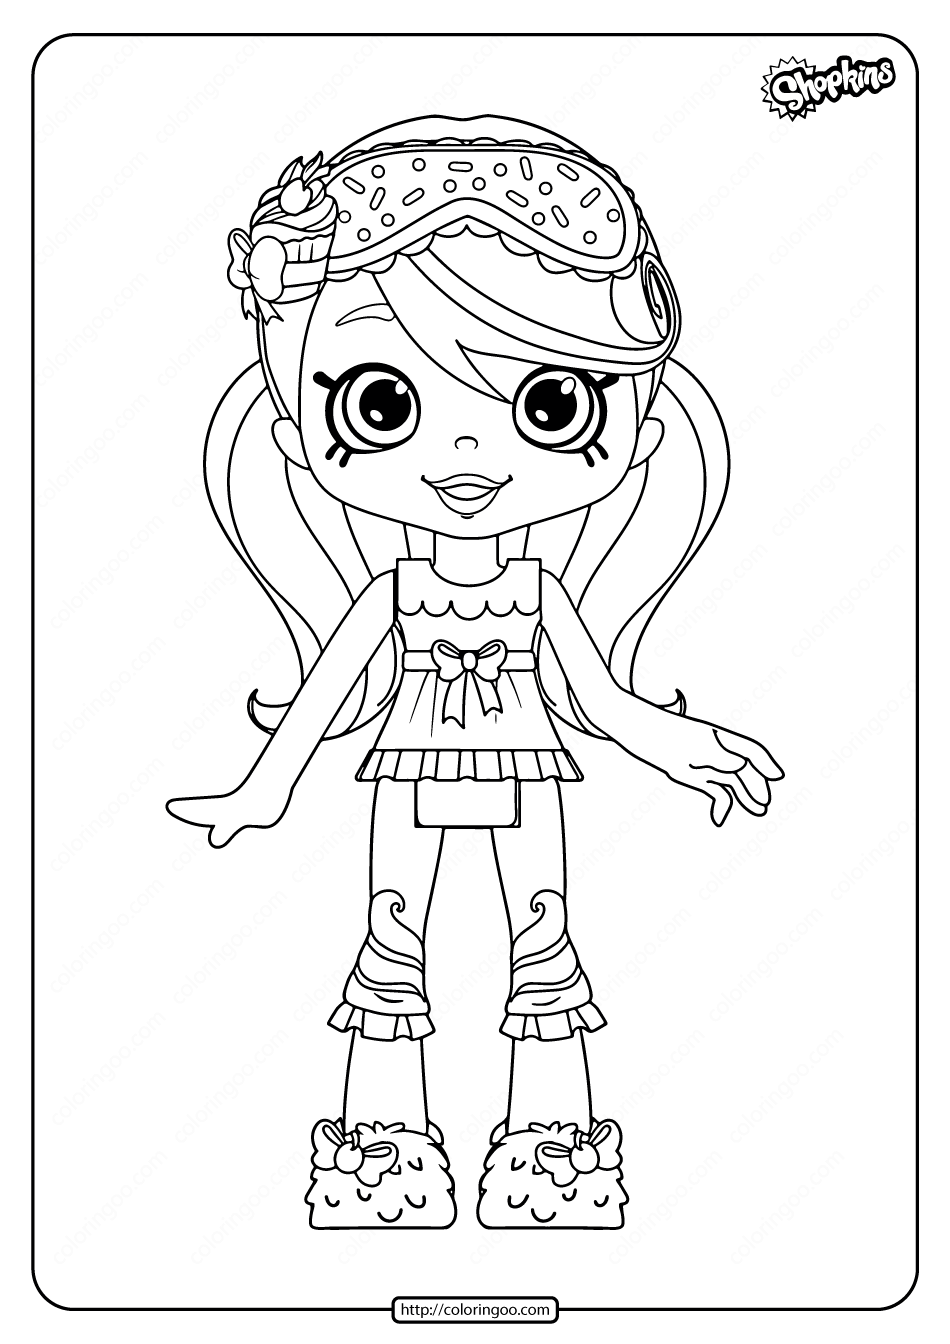 printable shopkins jessicake coloring pages